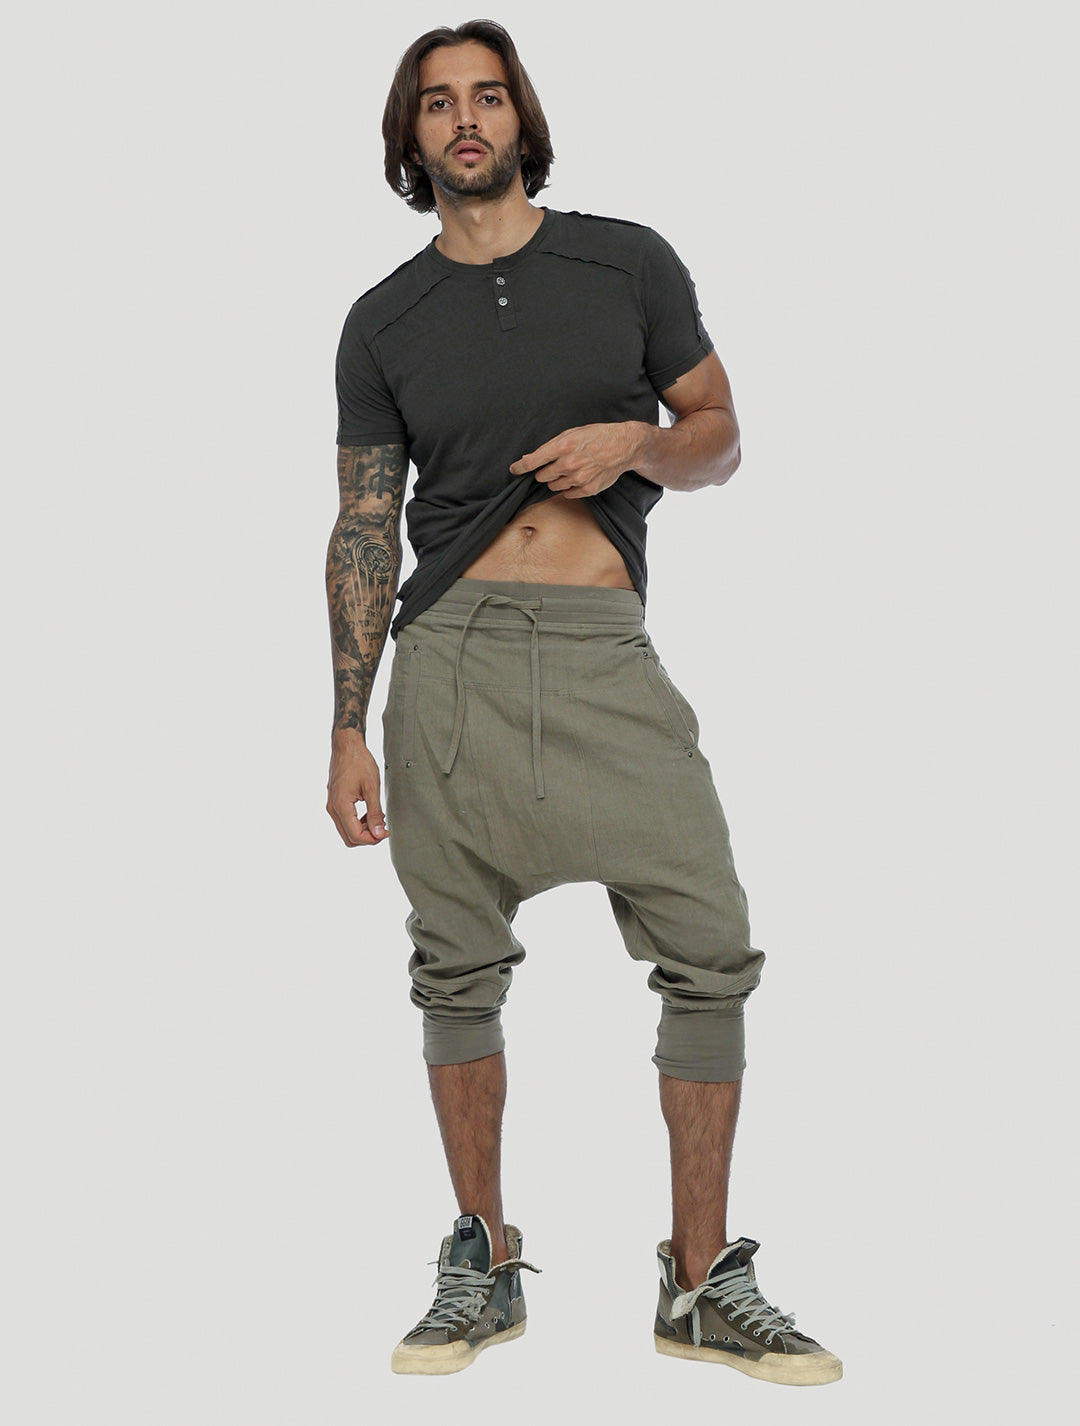 MENS CARGO 3/4 PANTS : Amazon.in: Clothing & Accessories